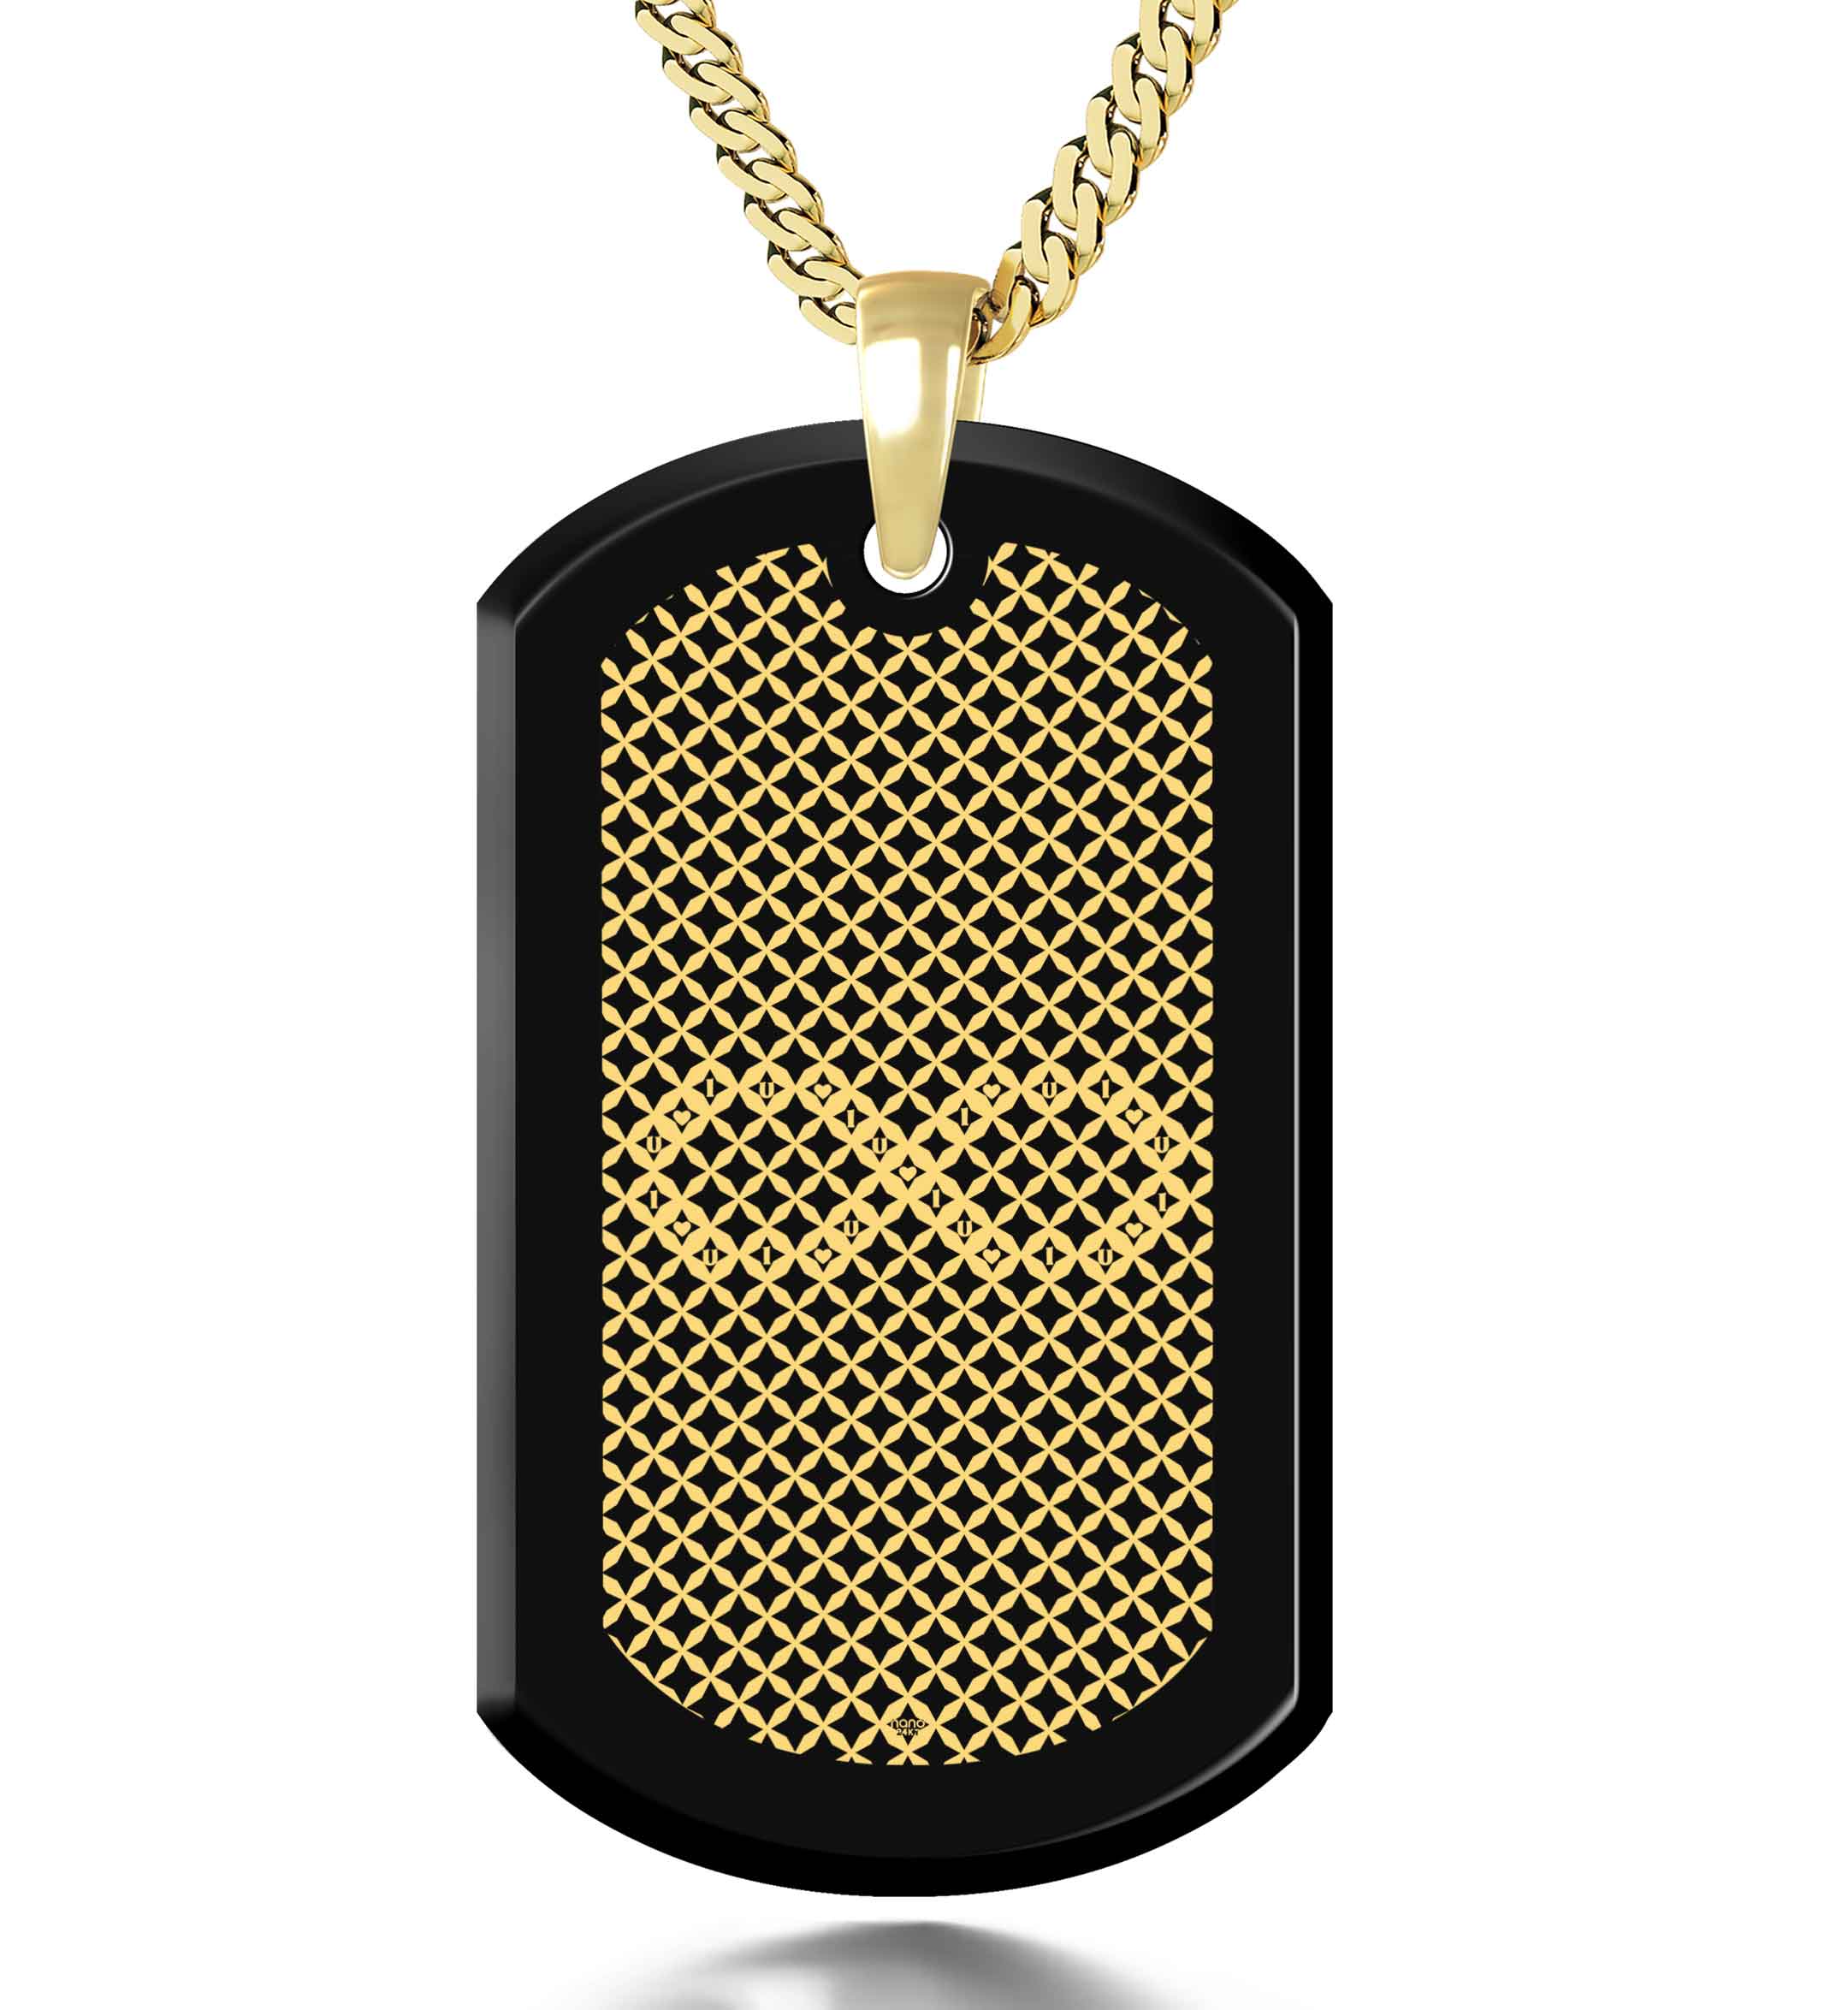 Men’s Dog Tag Necklace Infinity Pendant 24k Gold Inscribed Onyx Stone with a geometric pattern displayed frontally.